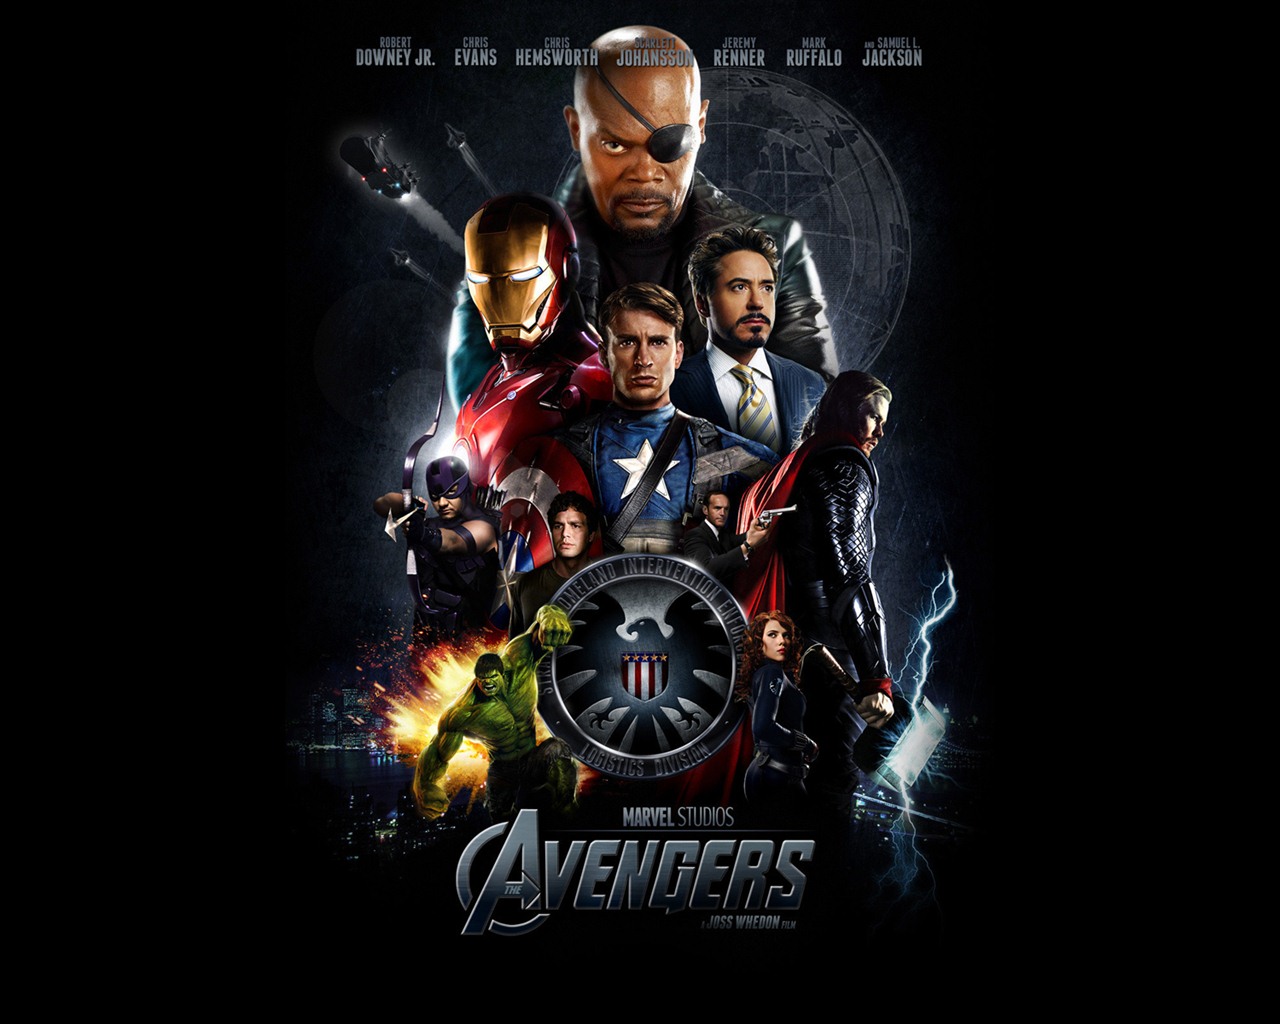 The Avengers 2012 HD wallpapers #16 - 1280x1024